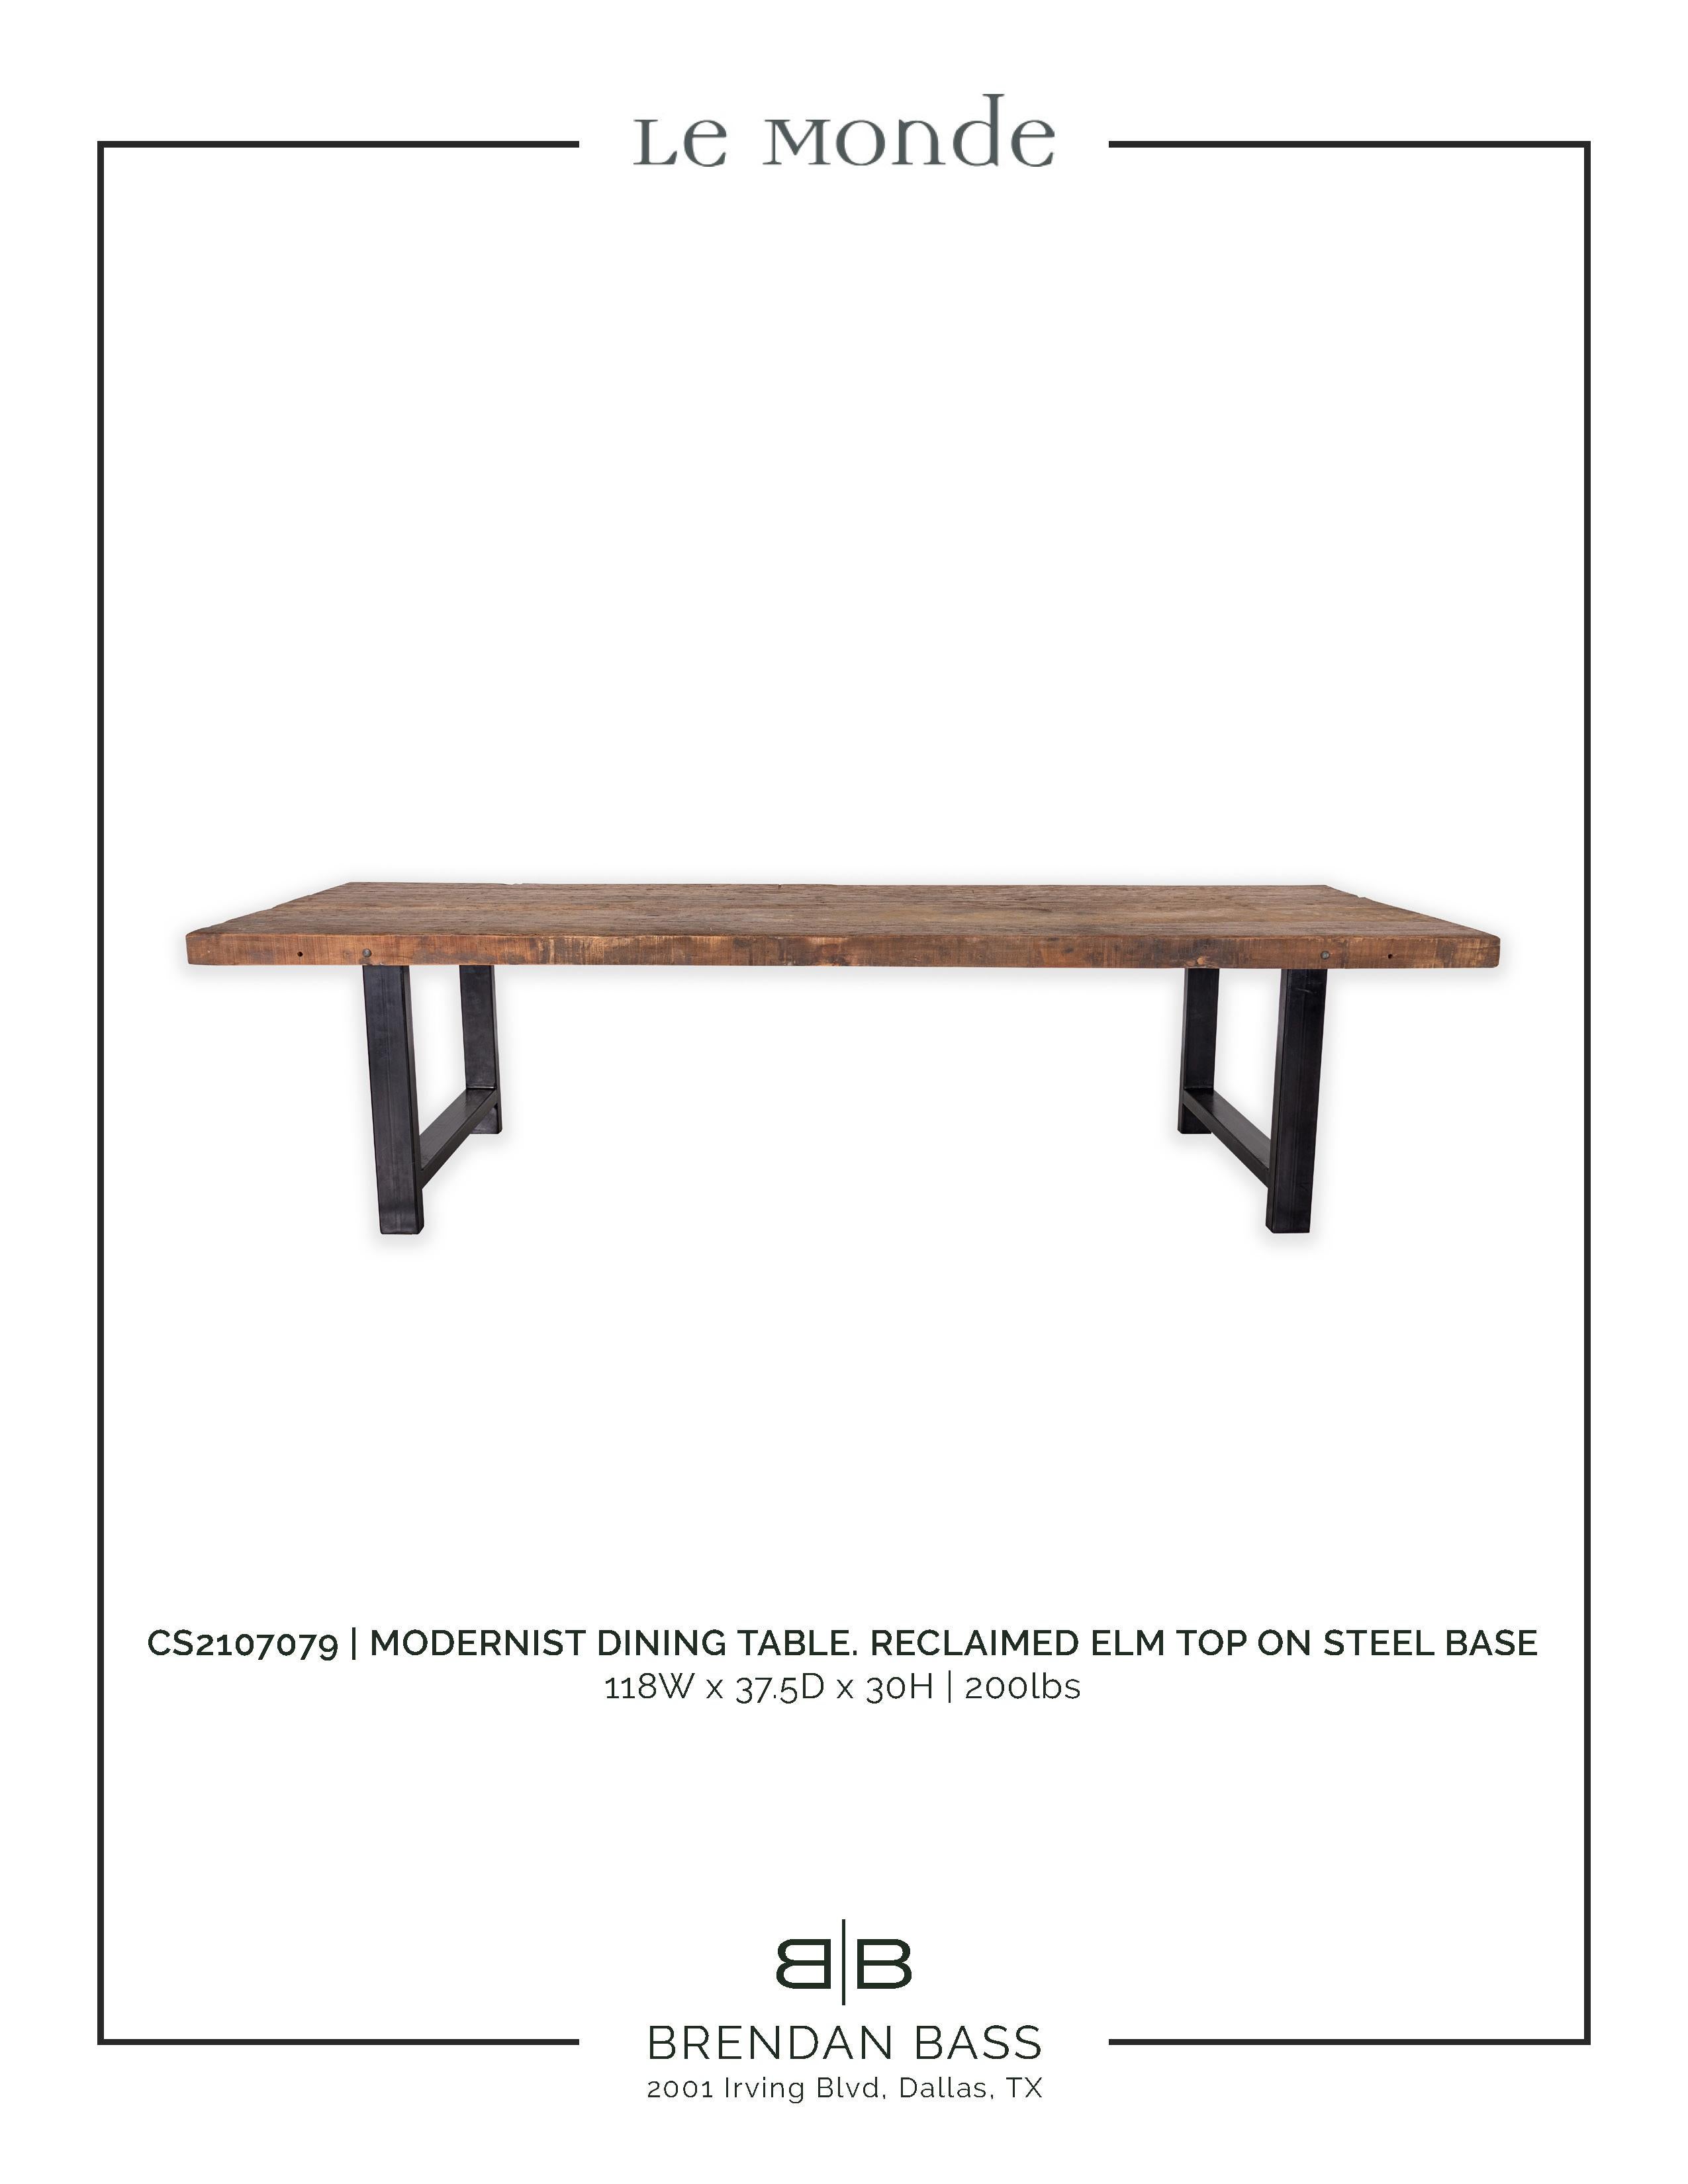 Modernist Dining Table, Reclaimed Elm Top on Ebonized Steel Base In Good Condition For Sale In Dallas, TX